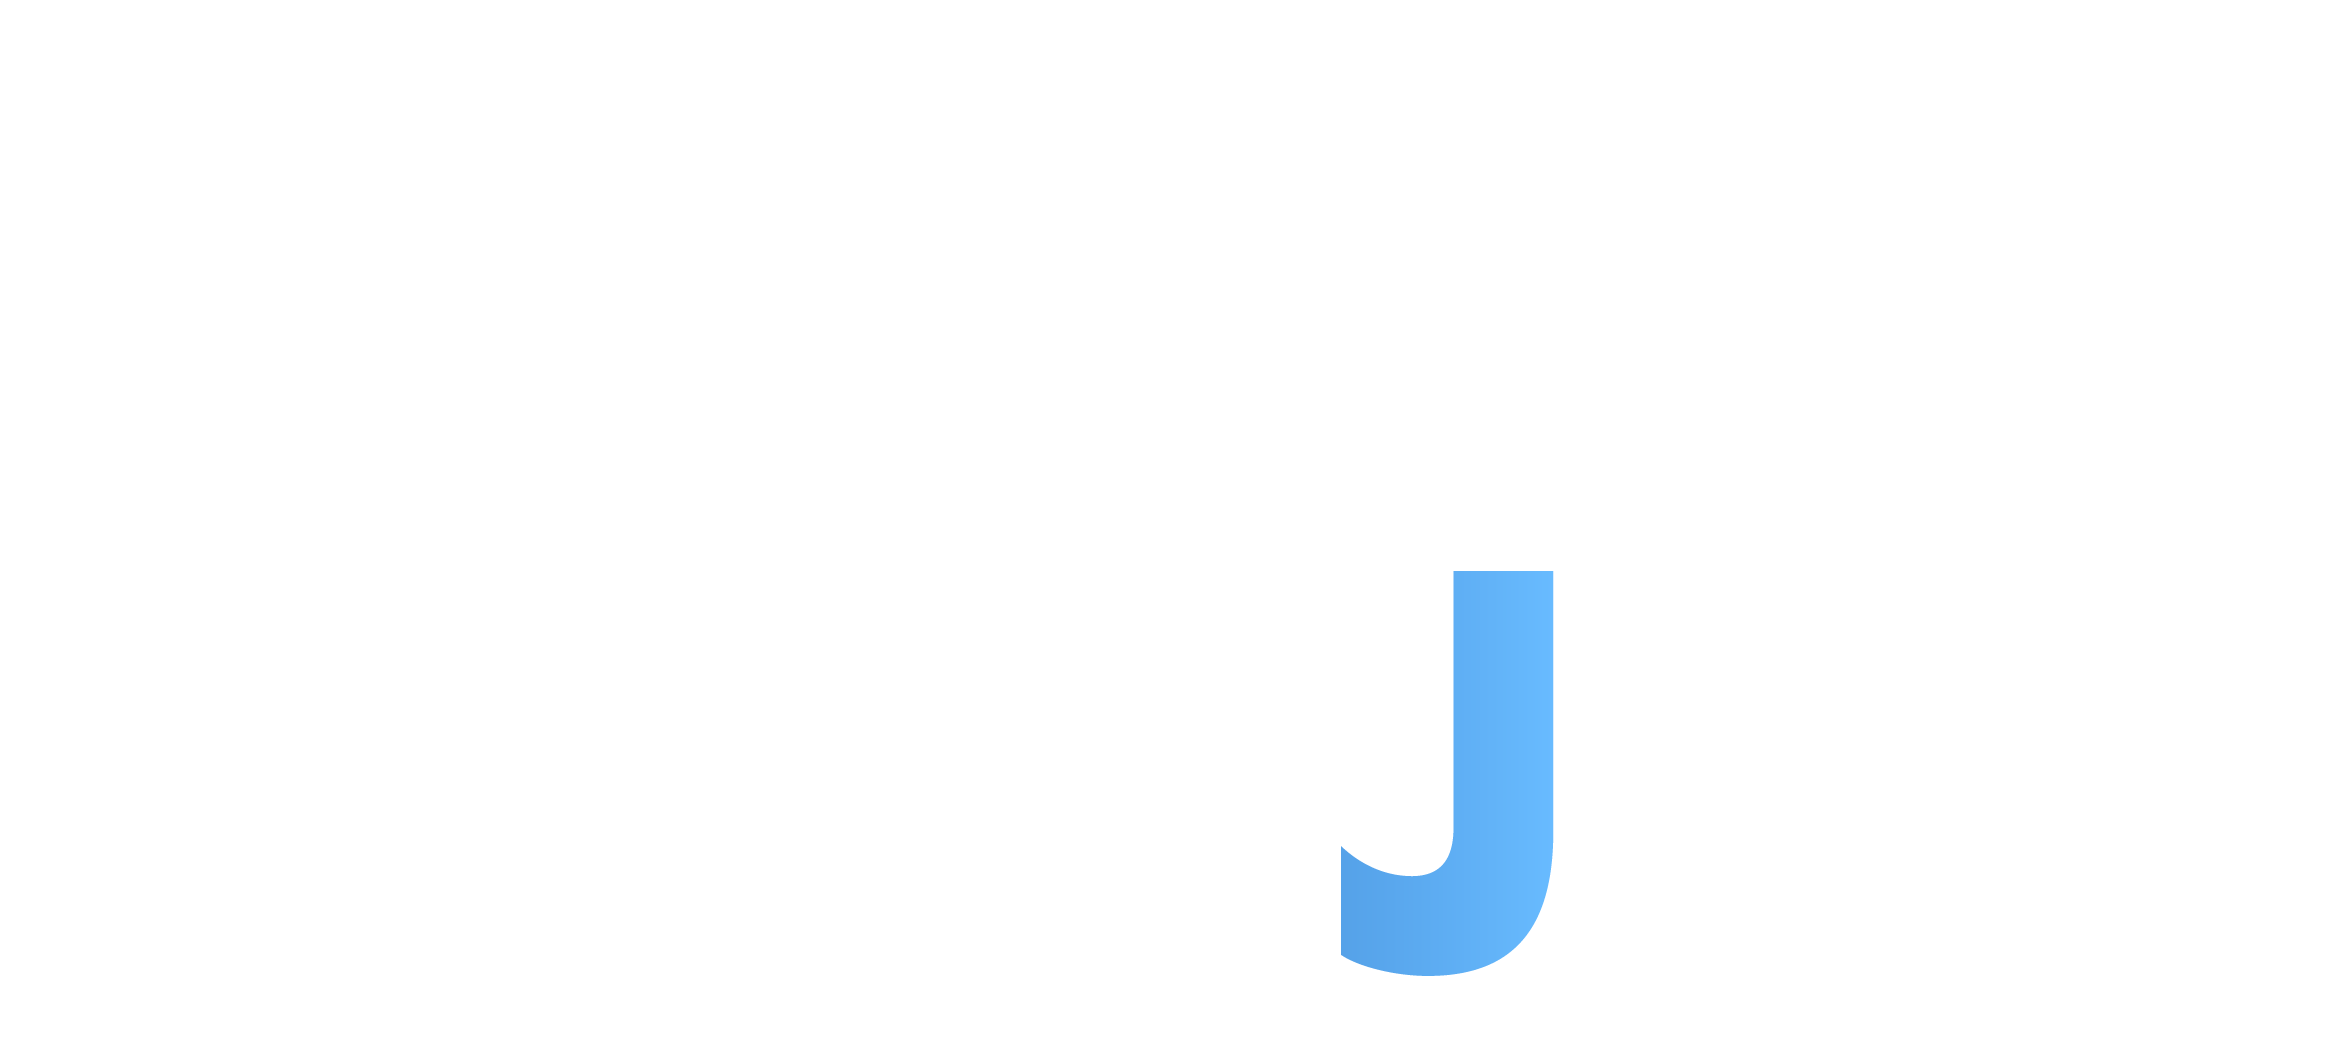 Project Bluejay